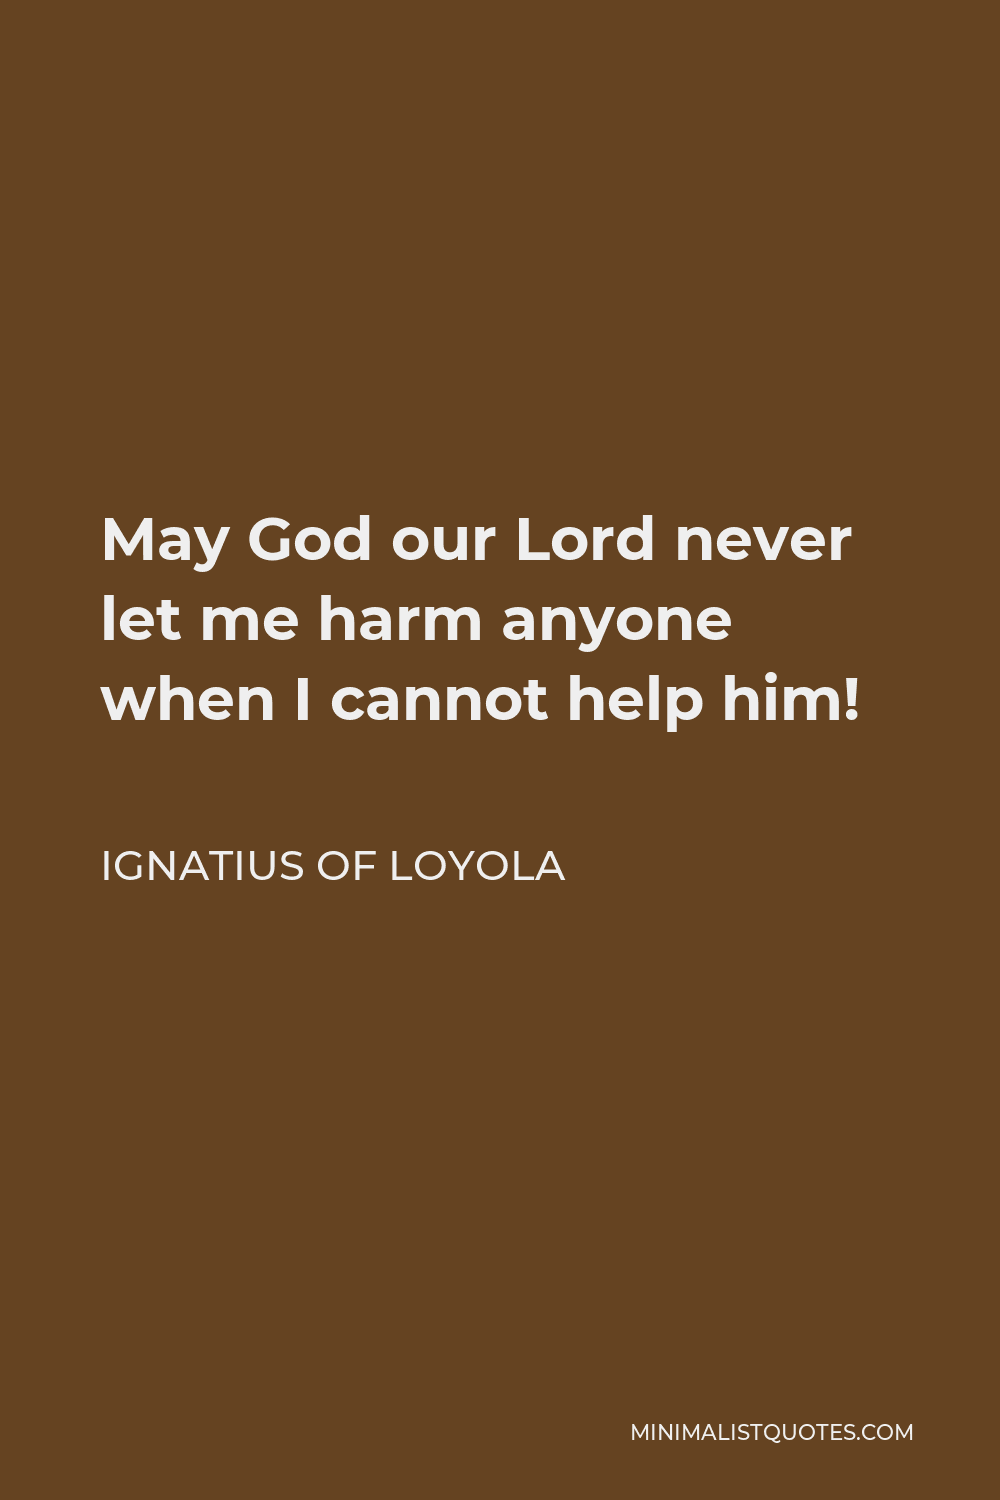 Ignatius of Loyola Quote - May God our Lord never let me harm anyone when I cannot help him!